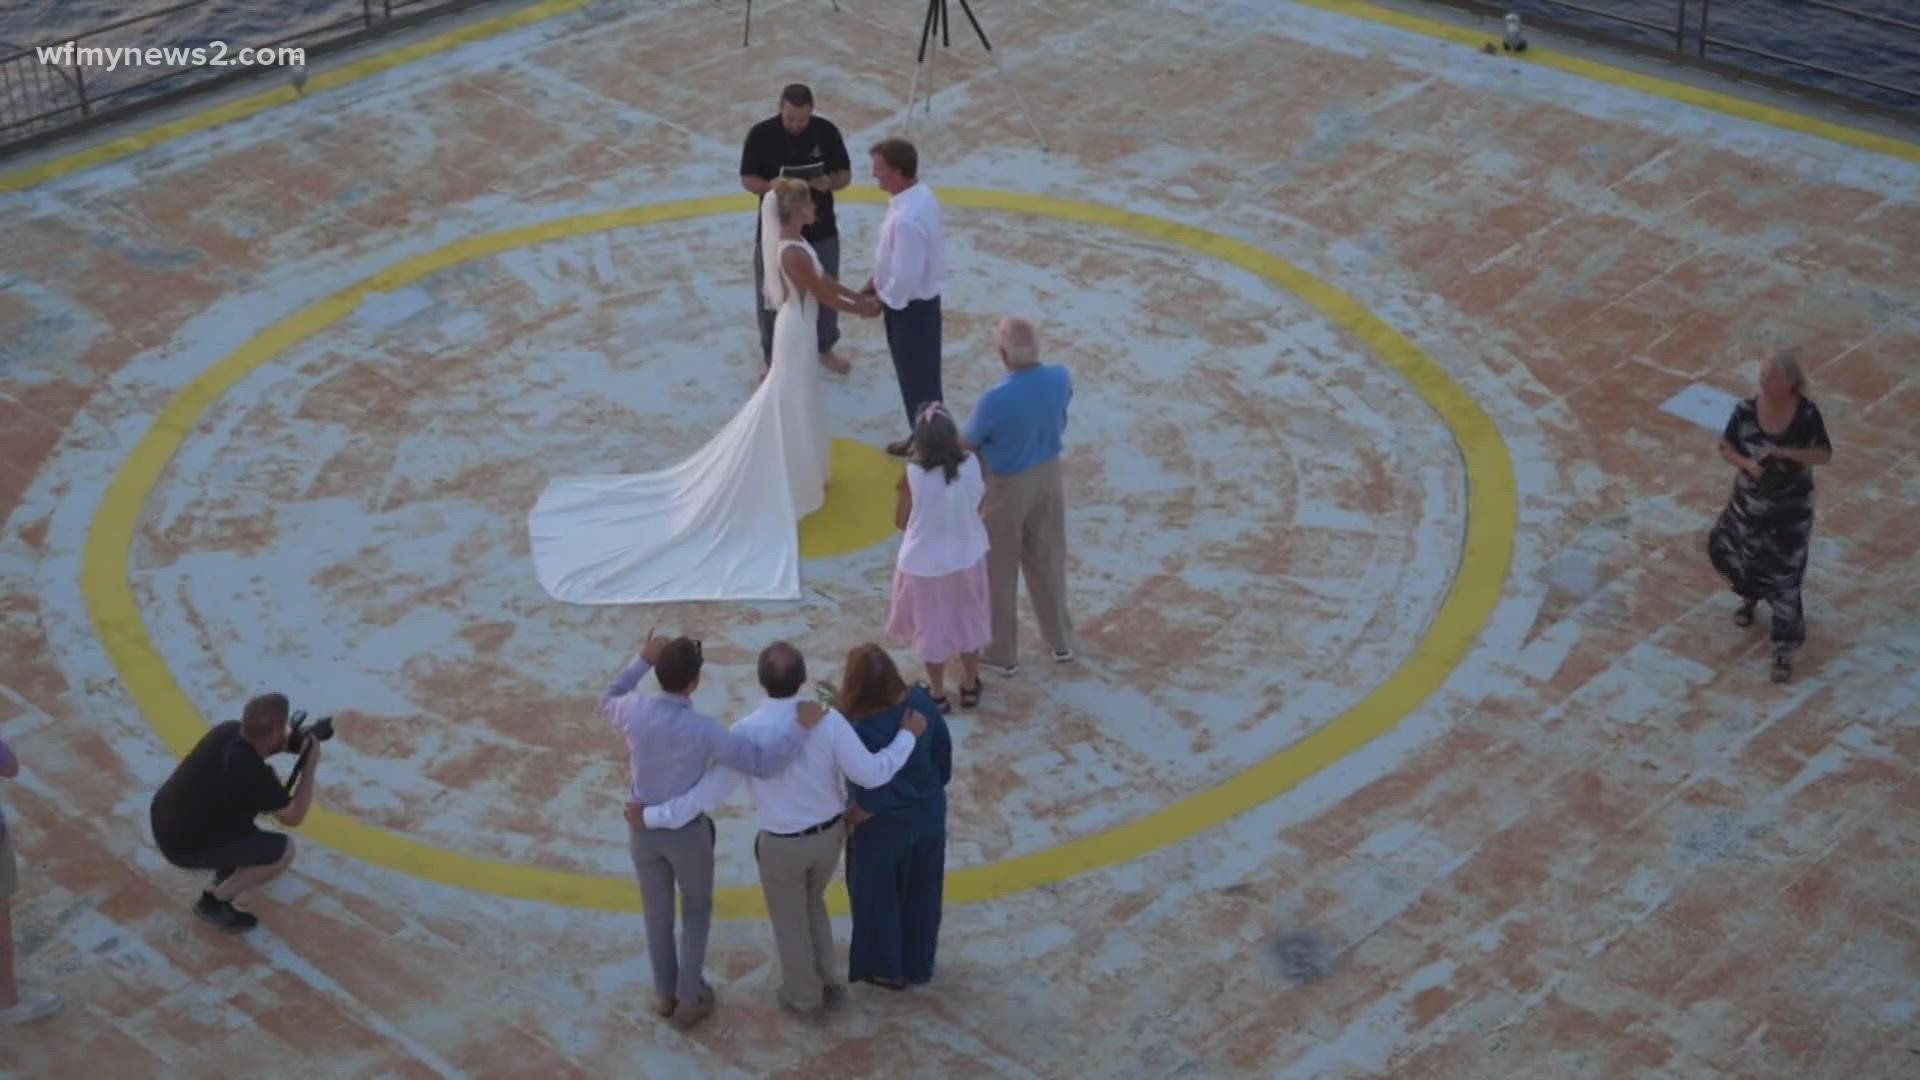 Ben and Audrey Black had a one-of-a-kind wedding ceremony in the middle of the sea. The couple tied the knot at the Frying Pan Tower near Cape Fear – the first-ever.